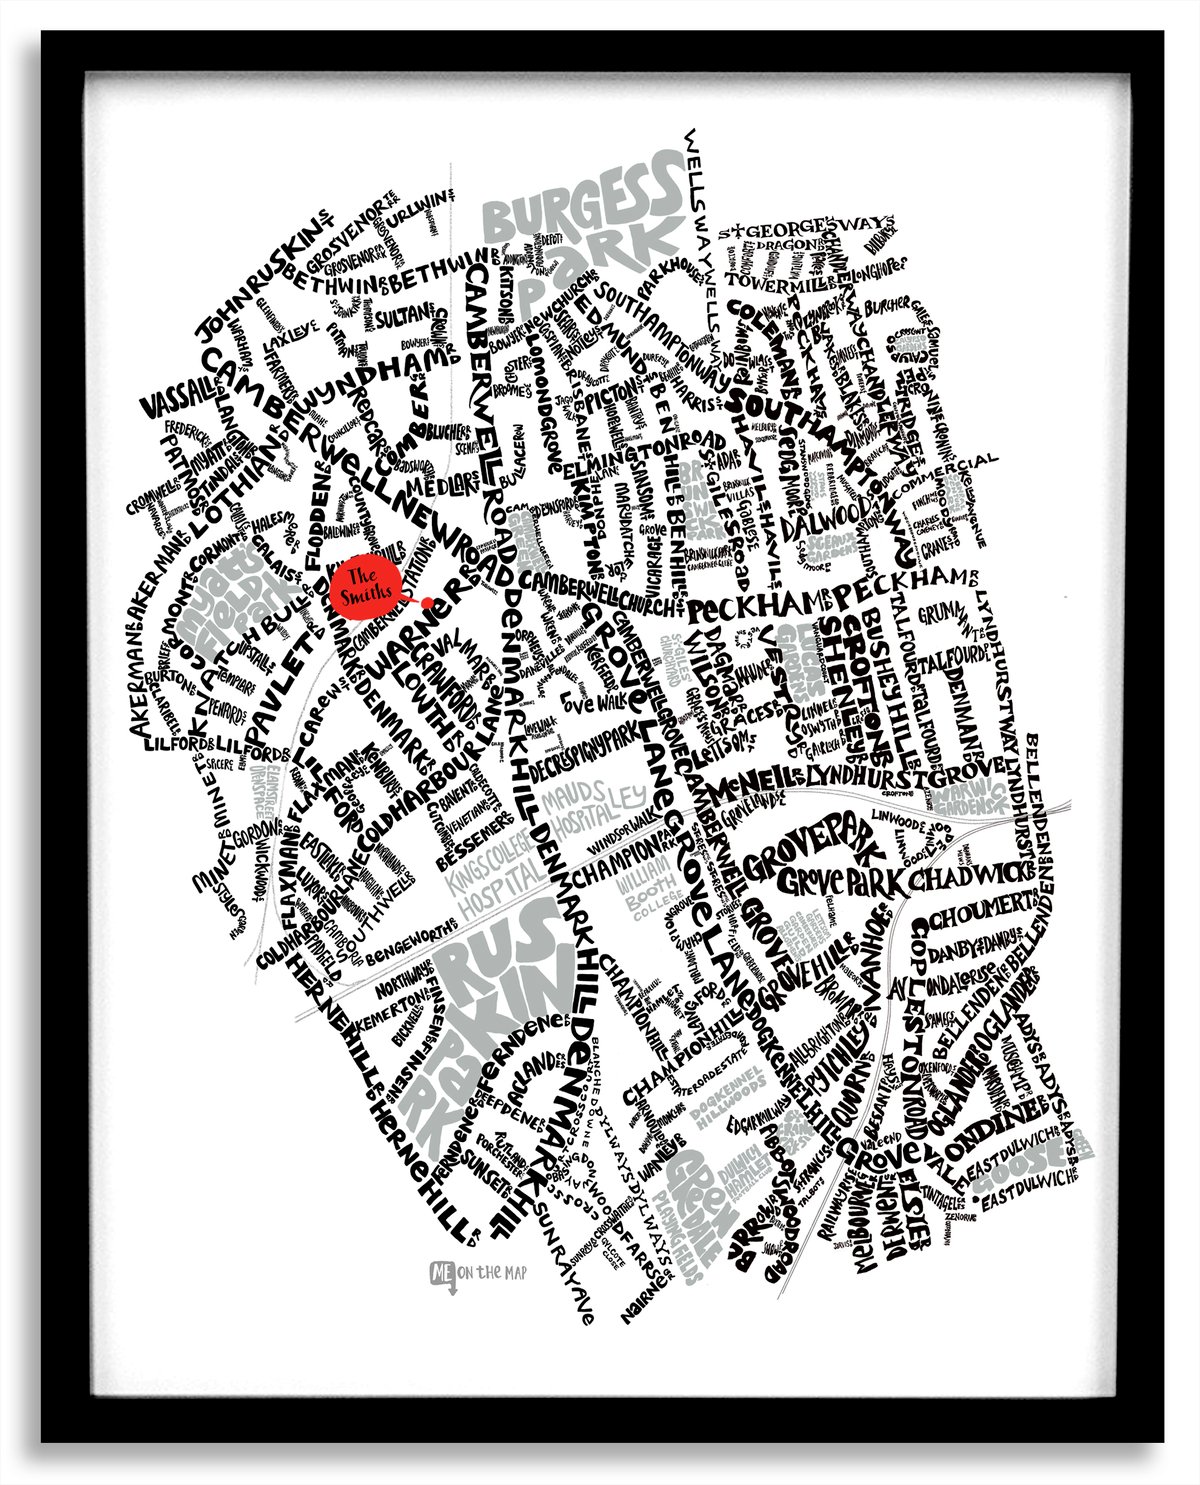 Image of Camberwell & Denmark Hill SE5 - SE London Type Map